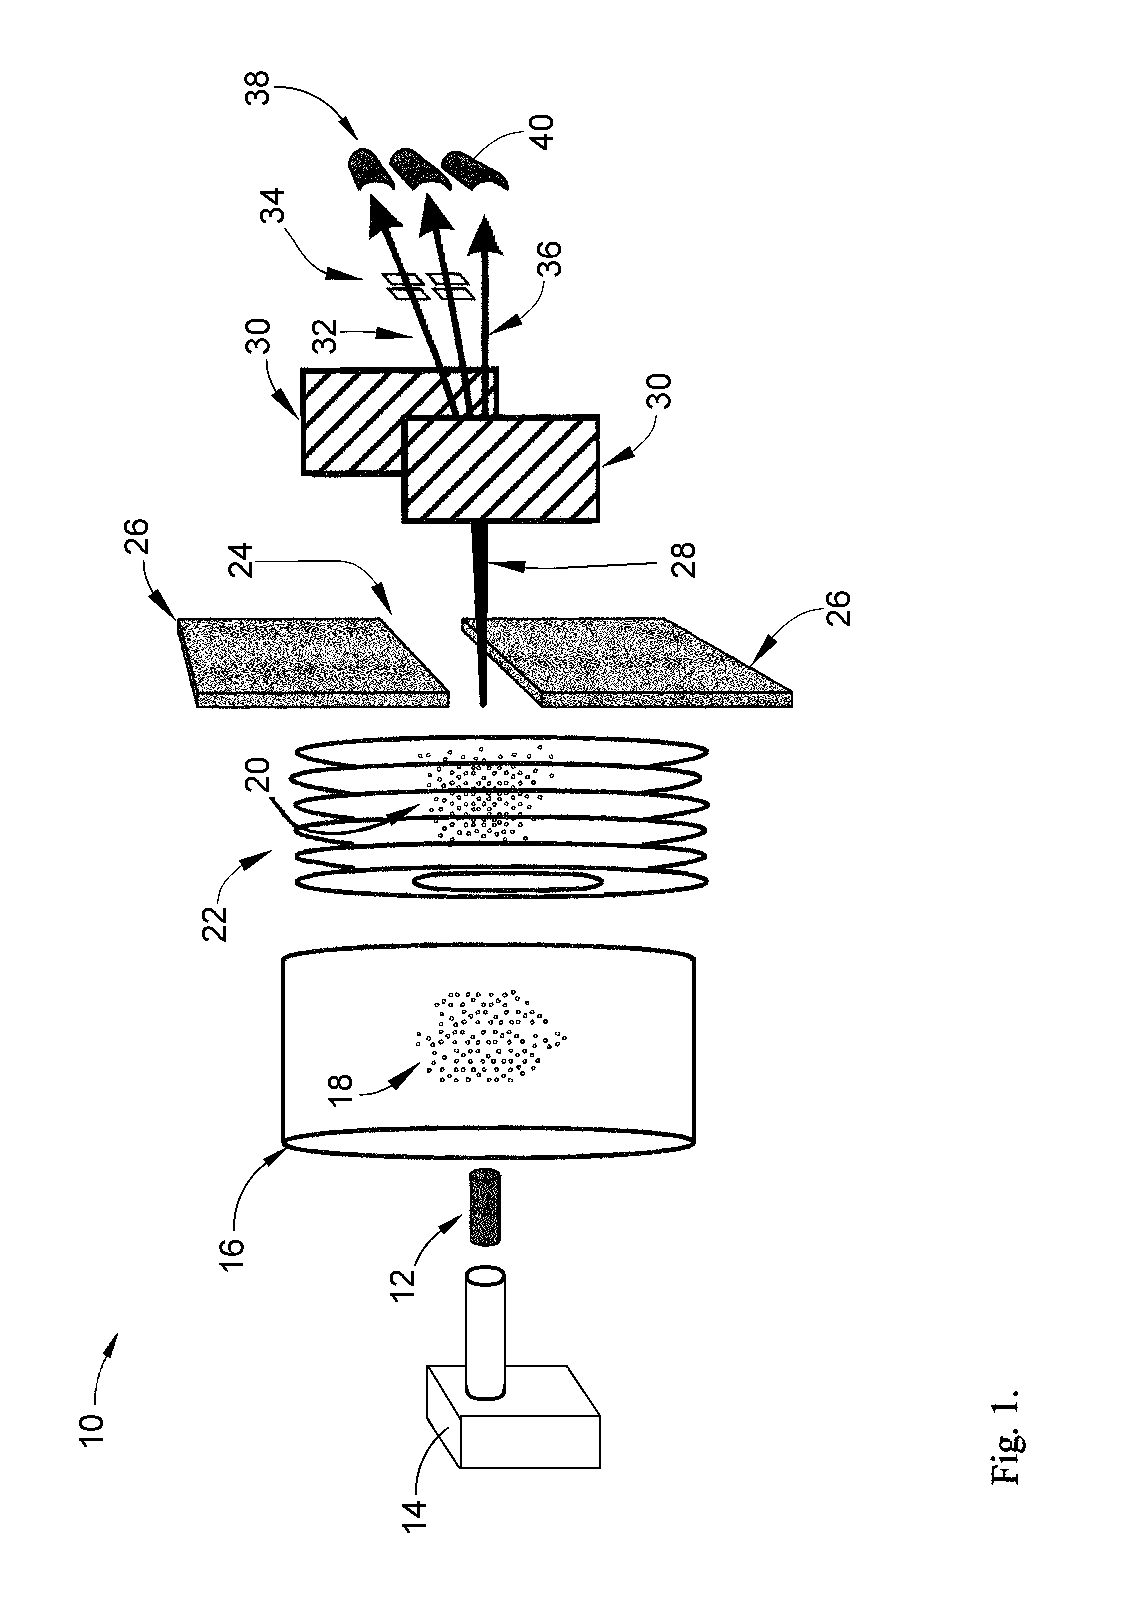 Isotope separation process and apparatus therefor